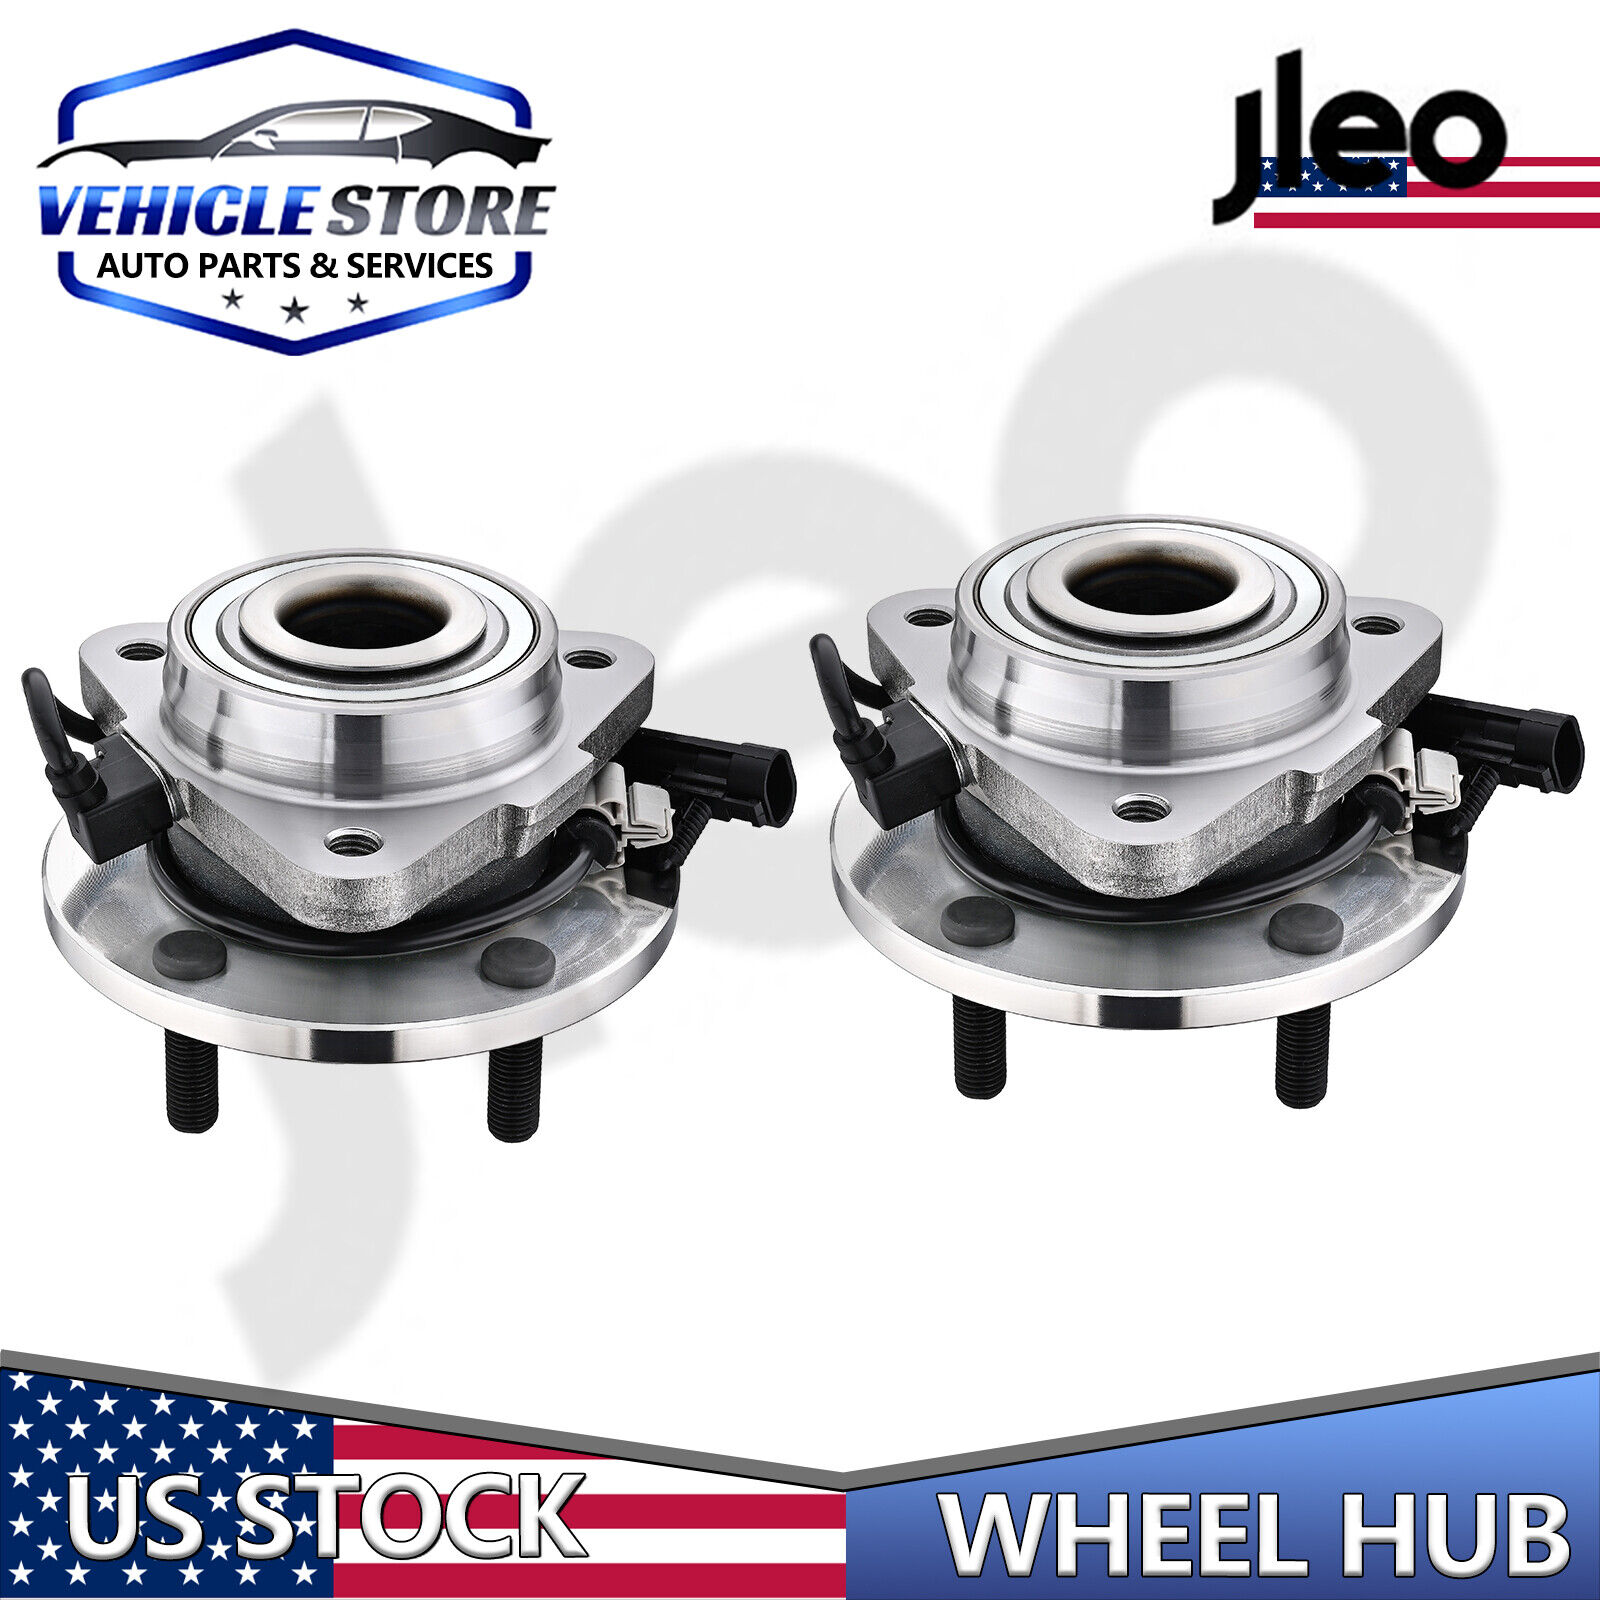 2WD FRONT Wheel Bearing and Hub Assembly for 1998 - 2004 Chevy Blazer GMC Jimmy